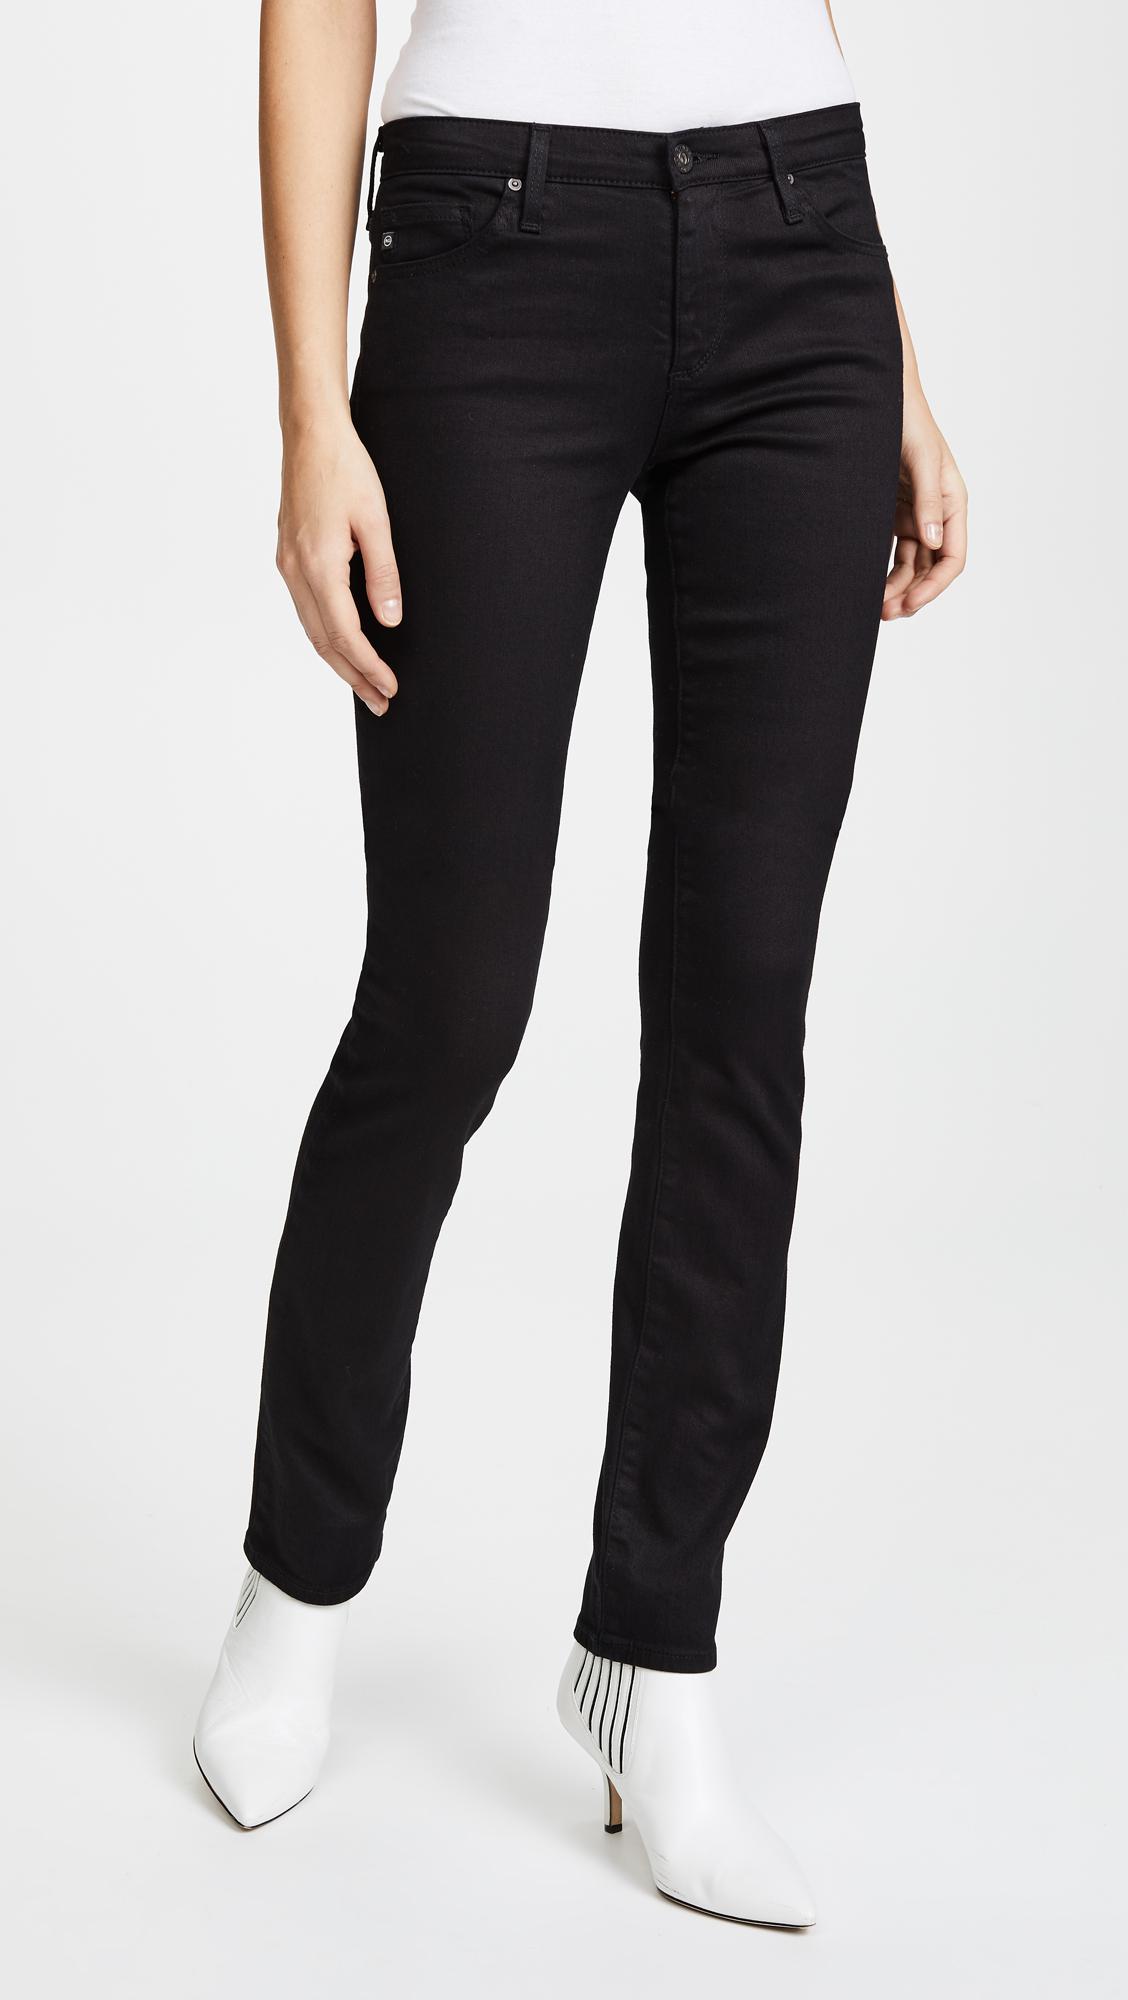 Lyst - Ag Jeans Harper Straight Jean in Black - Save 7%